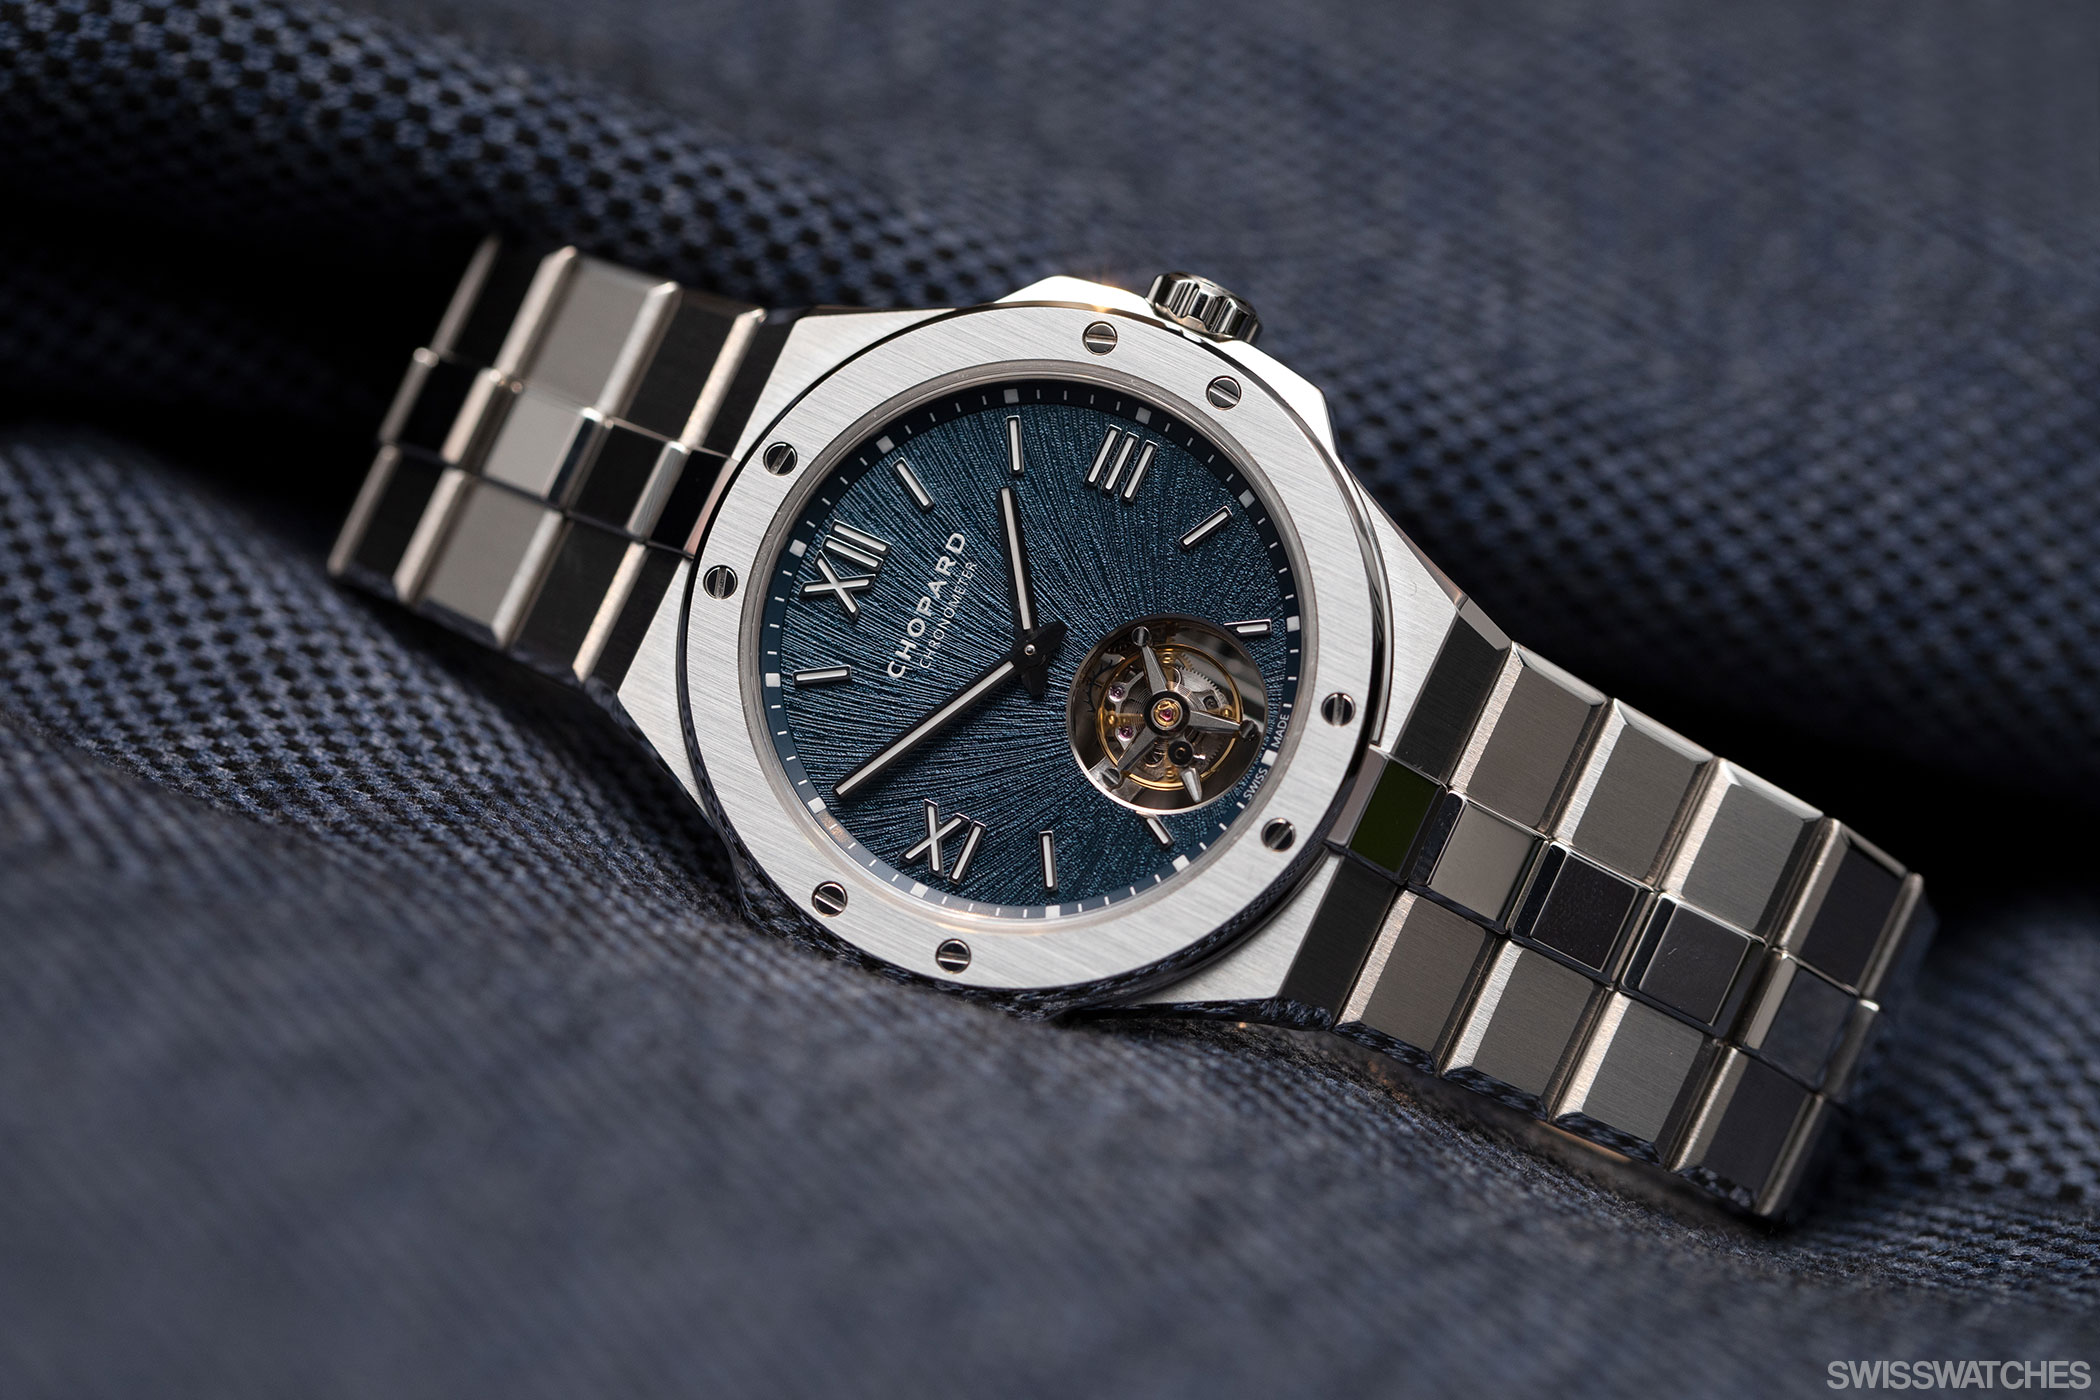 NWA: Chopard Alpine Eagle Maritime Edition - The Dive Watch Connection